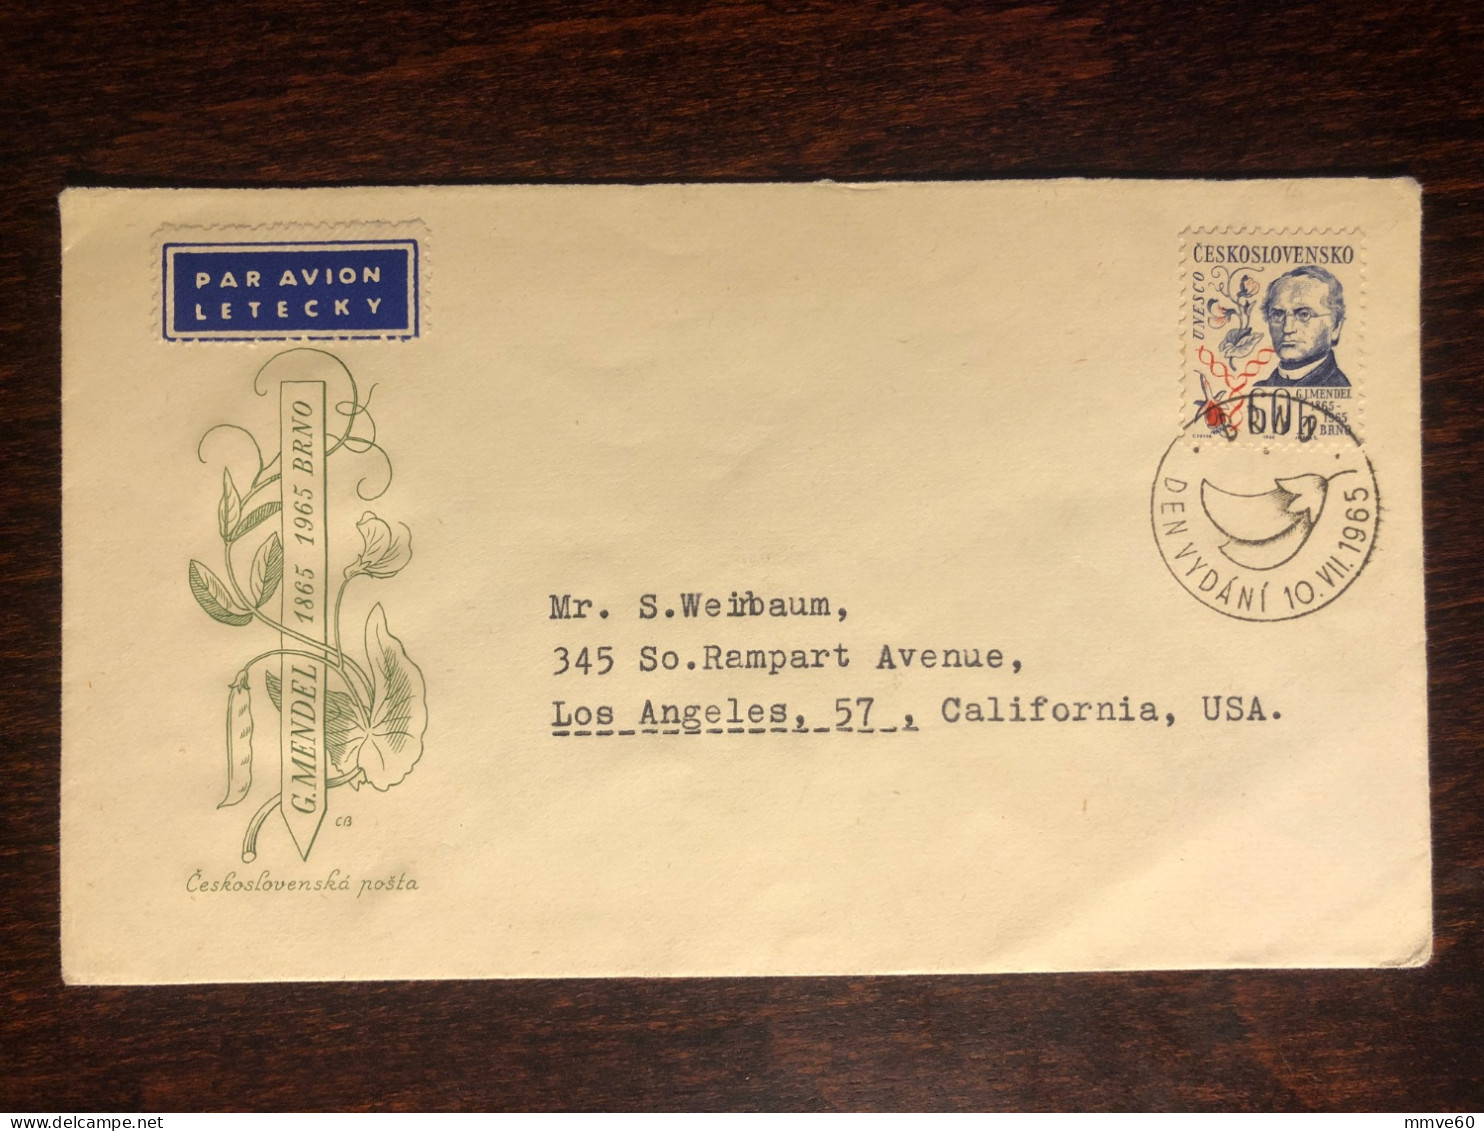 CZECHOSLOVAKIA FDC COVER 1965 YEAR MENDEL GENETIK HEALTH MEDICINE STAMPS - FDC